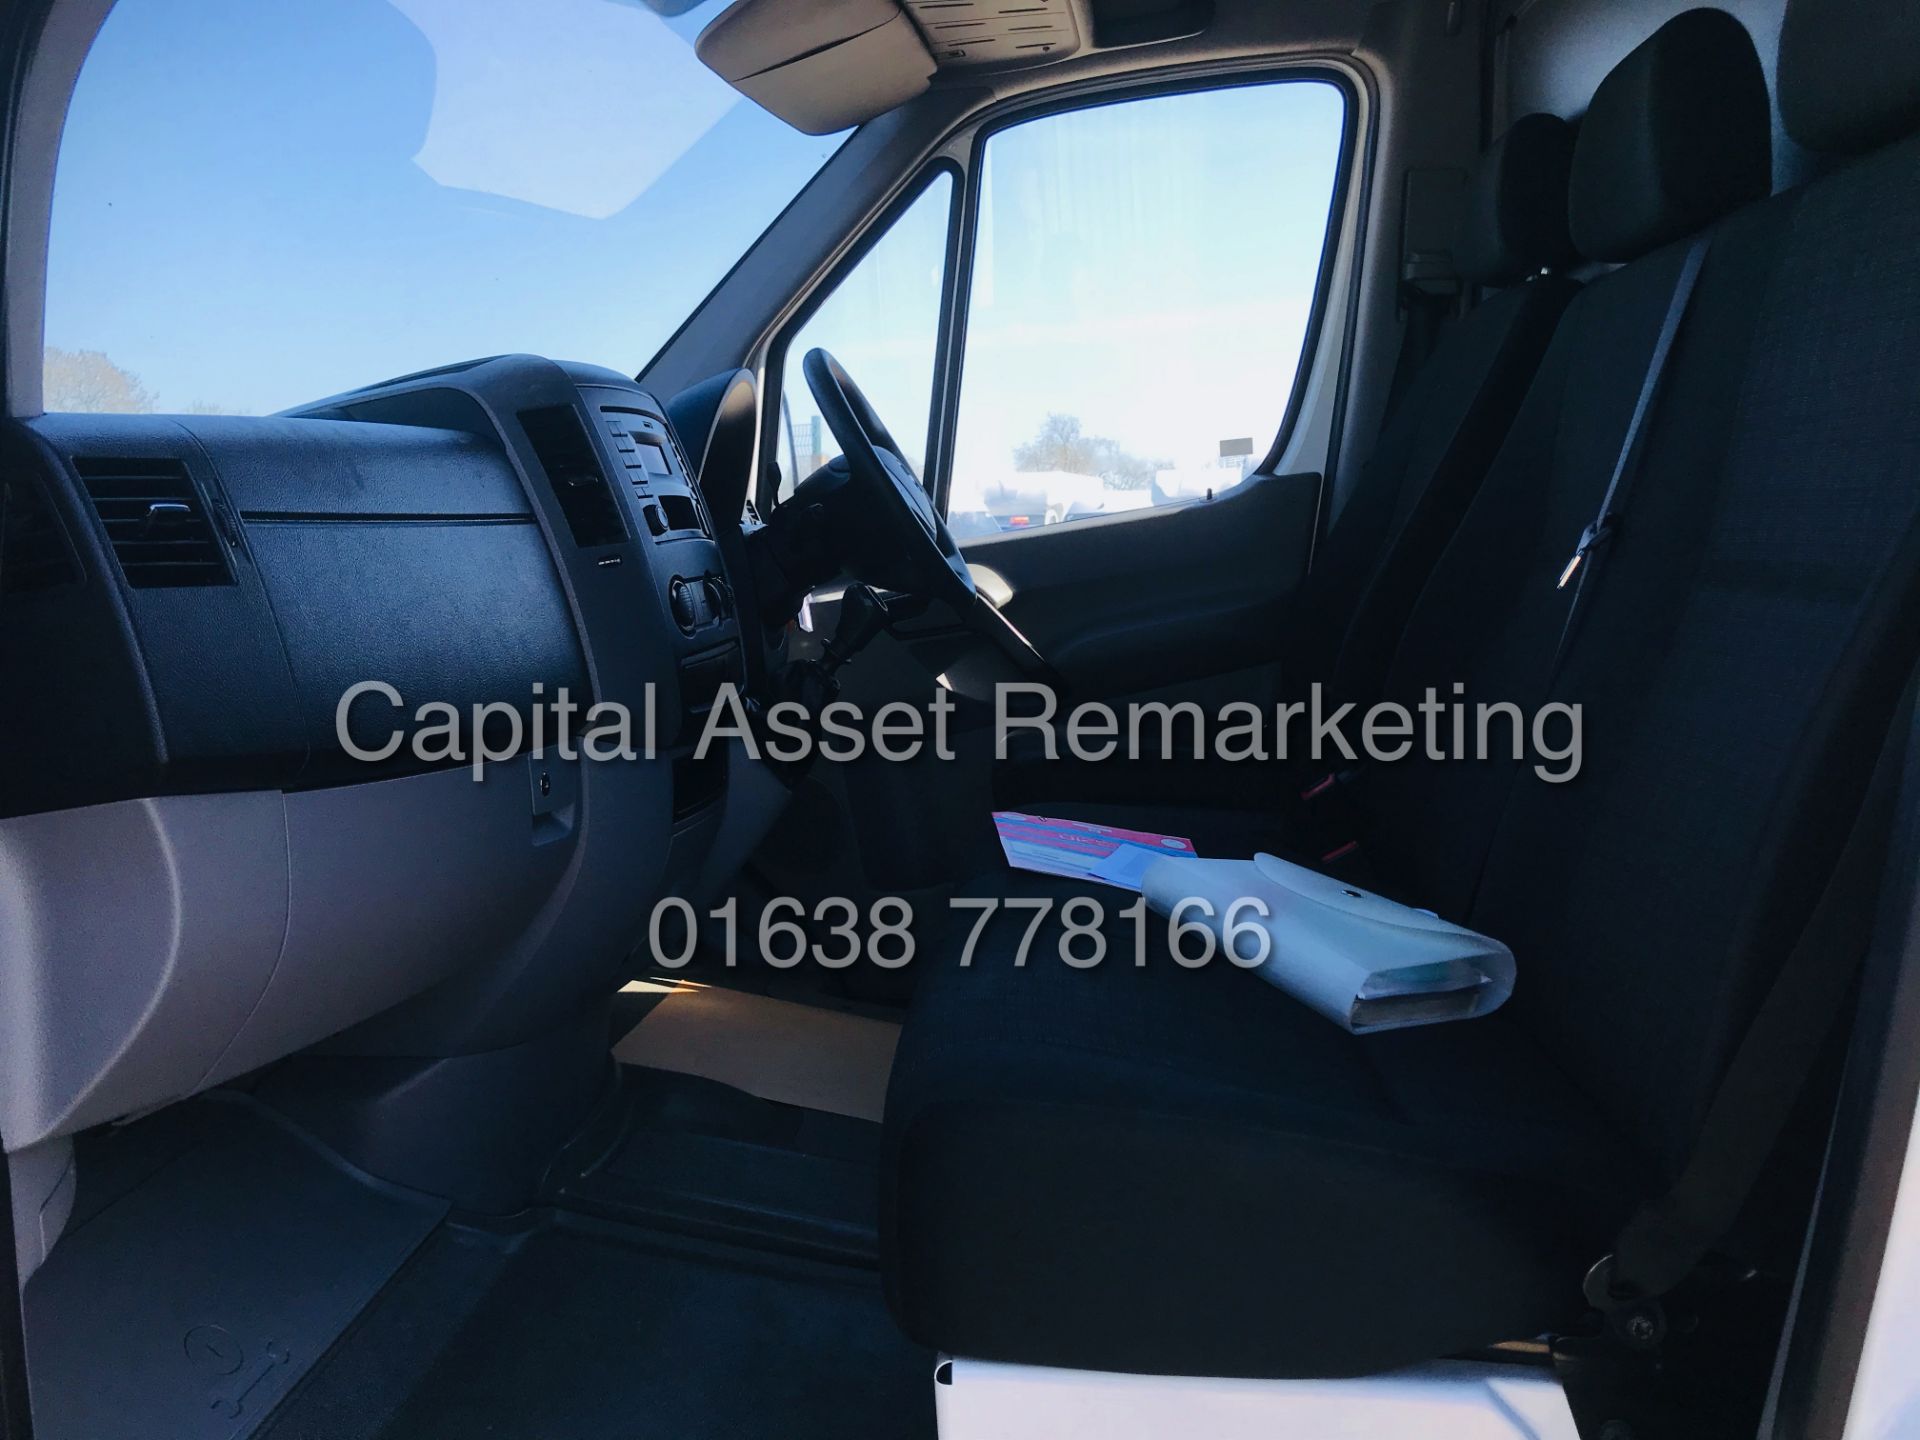 On Sale MERCEDES SPRINTER 313CDI "LWB" 4.2MTR WITH INTERNAL ELECTRIC TAIL LIFT / RAMP (16 REG) MOTOx - Image 23 of 25